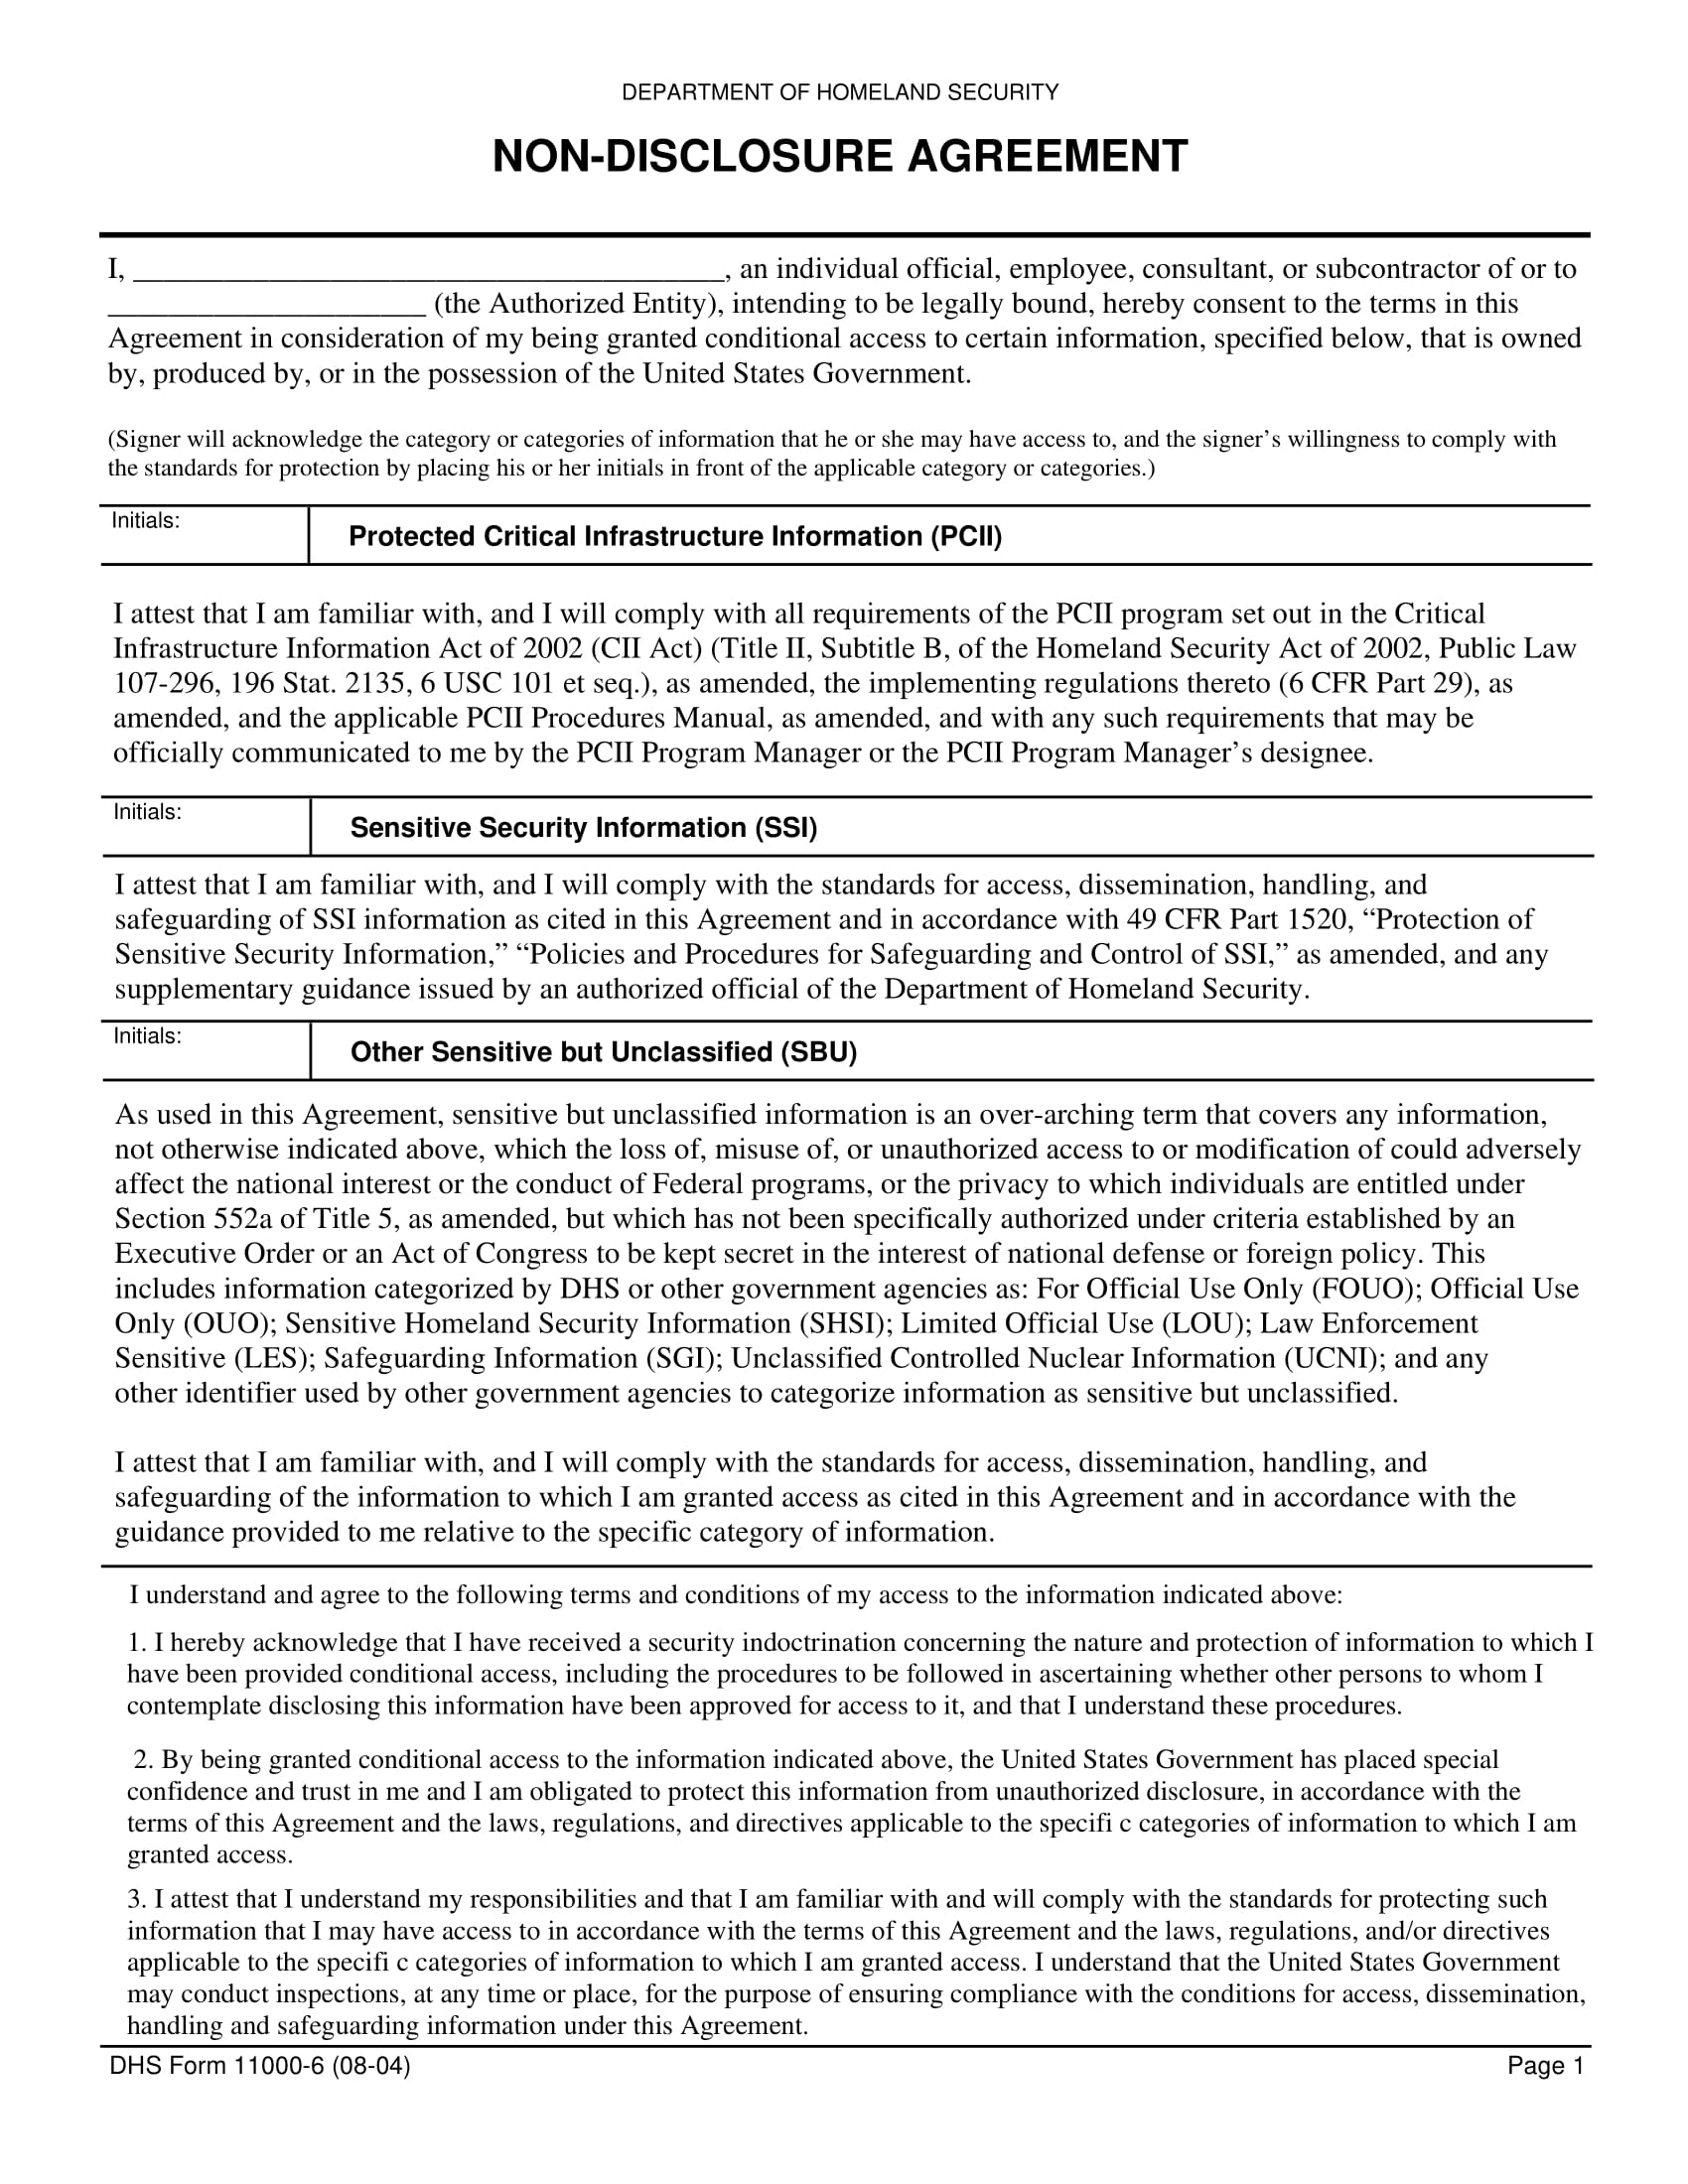 security personnel non disclosure agreement contract form 1